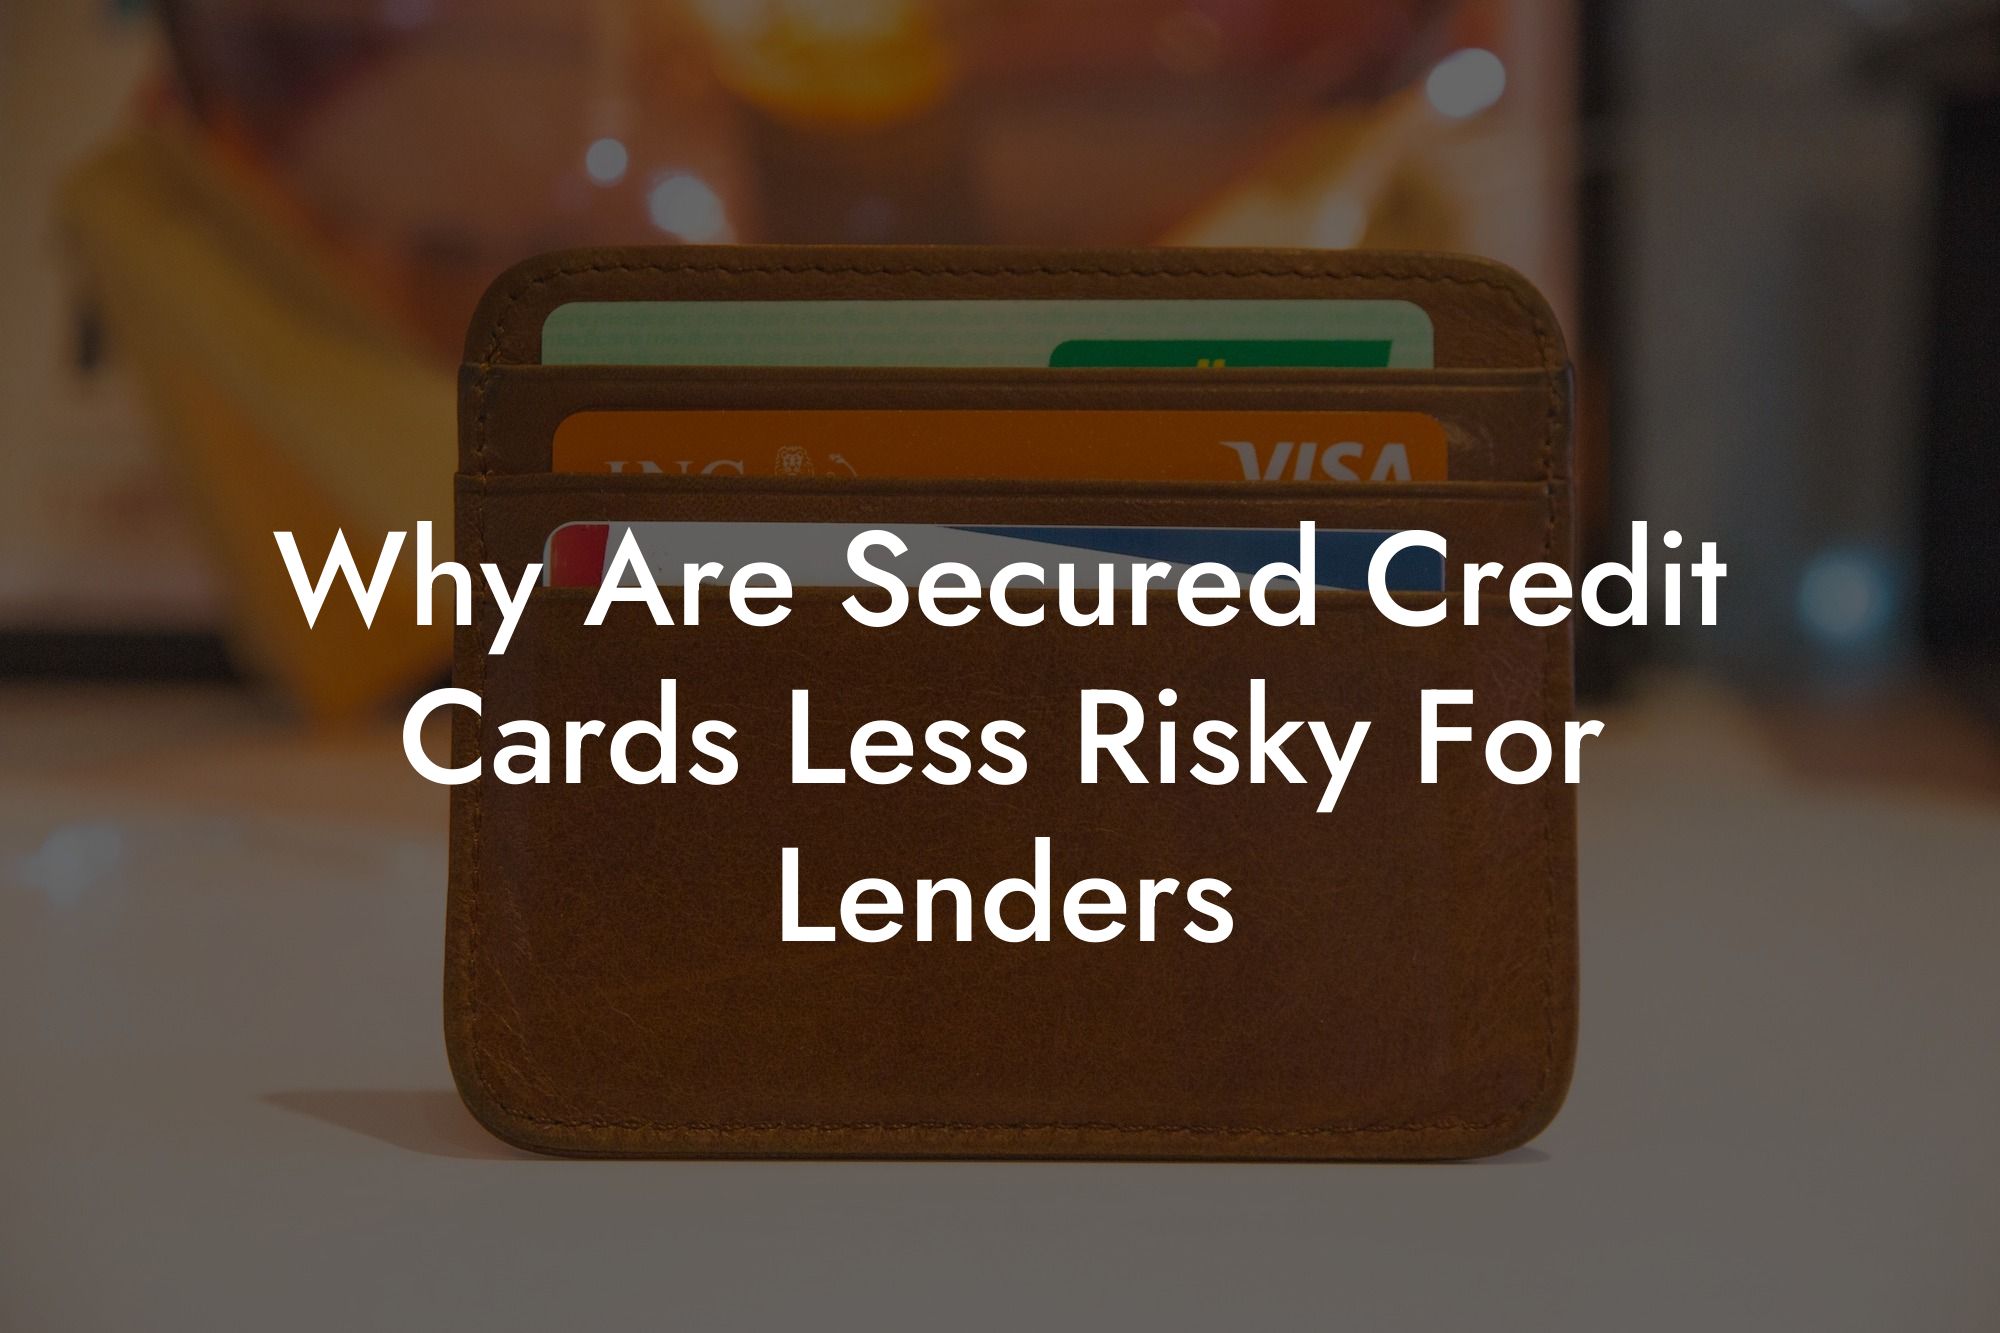 Why Are Secured Credit Cards Less Risky For Lenders